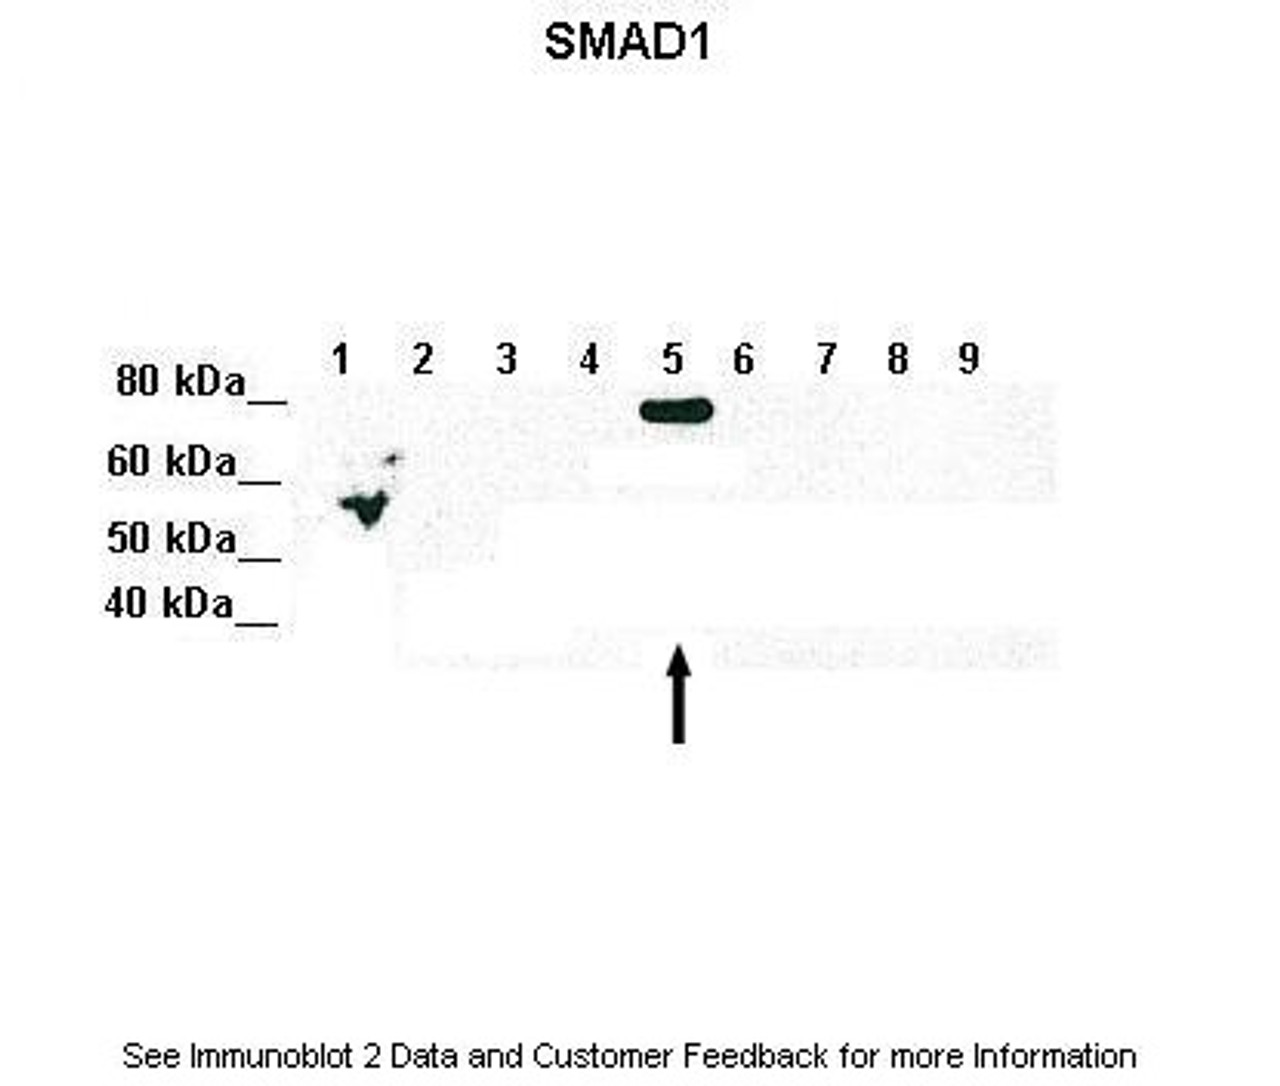 Antibody used in WB on r-SMAD5 at: 1:1000 (Lane 1: 5ug of transfected 293T lysate (SMAD1) , Lane 2: 5ug of transfected 293T lysate (SMAD2) , Lane 3: 5ug of transfected 293T lysate (SMAD3) , Lane 4: 5ug of transfected 293T lysate (SMAD4) , Lane 5: 5ug of transfected 293T lysate (SMAD5) , Lane 6: 5ug of transfected 293T lysate (SMAD6) , Lane 7: 5ug of transfected 293T lysate (SMAD7) , Lane 8: 5ug of transfected 293T lysate (SMAD8) , Lane 9: 5ug of transfected 293T lysate (GFP) ) .